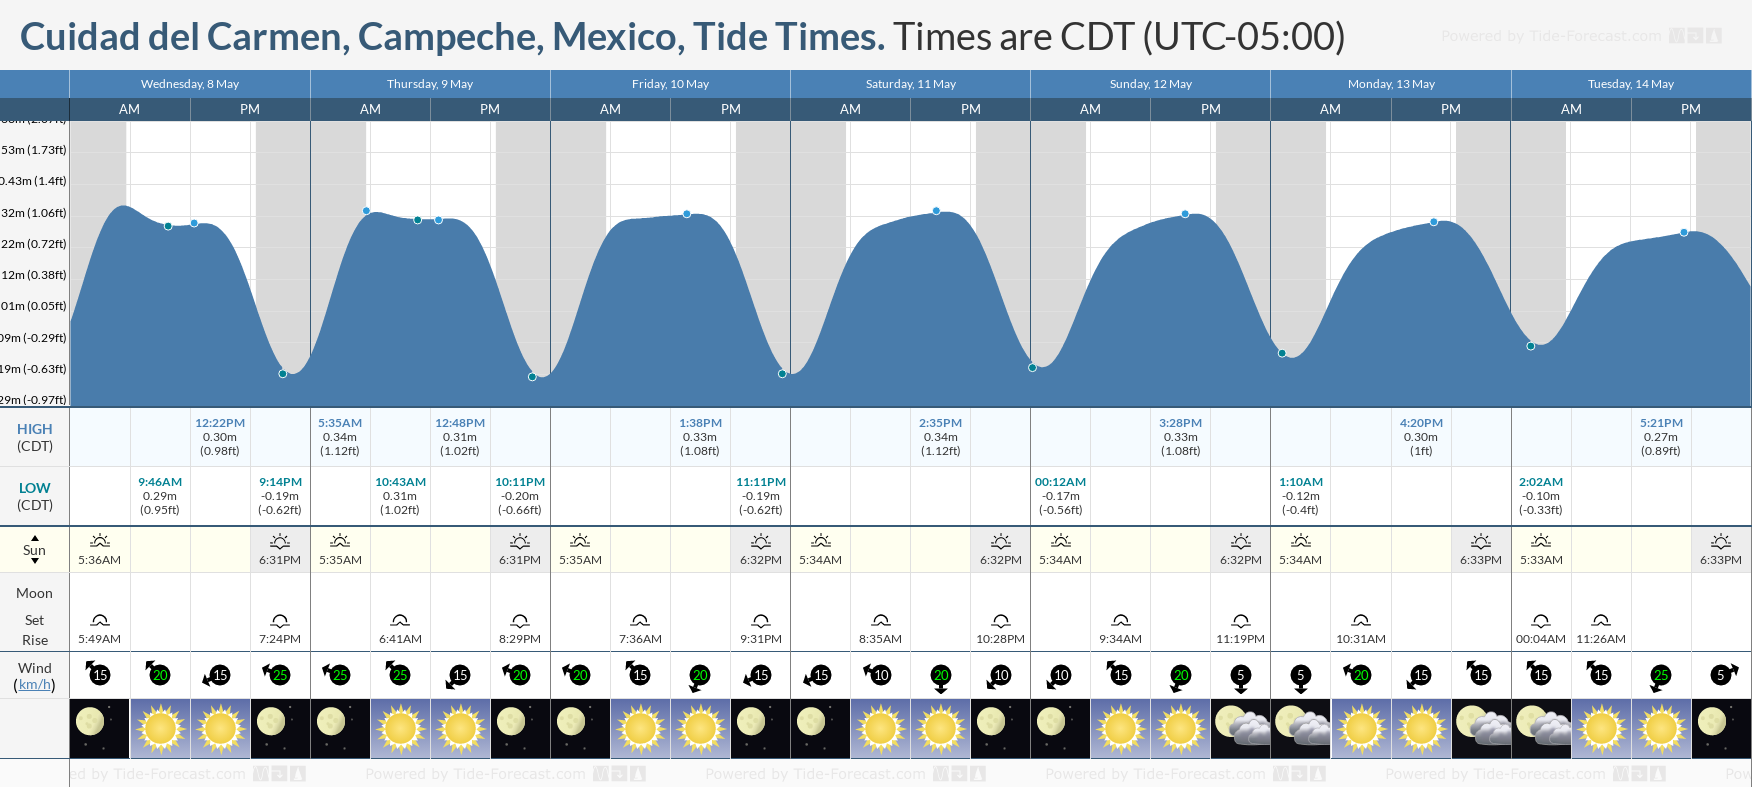 Cuidad del Carmen, Campeche, Mexico Tide Chart including high and low tide tide times for the next 7 days